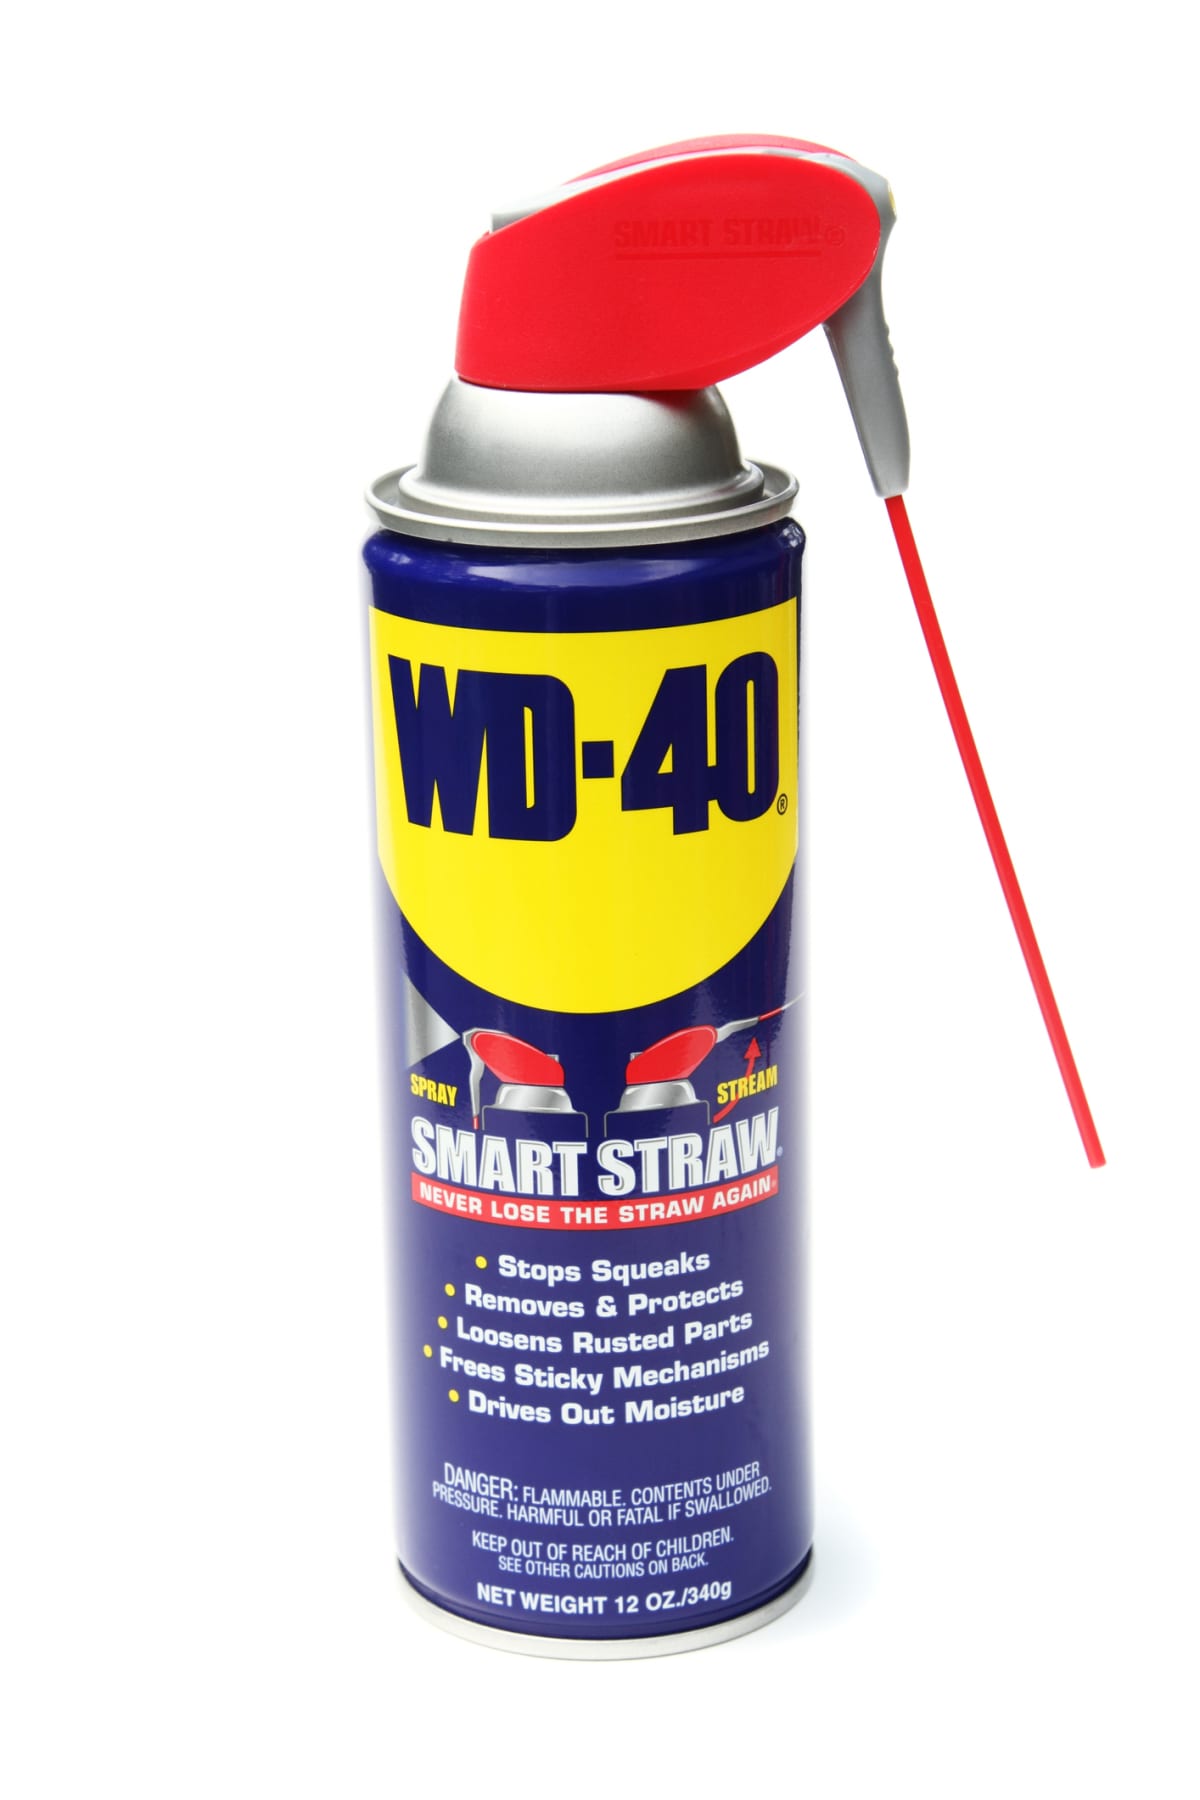 A can of WD-40 against white background